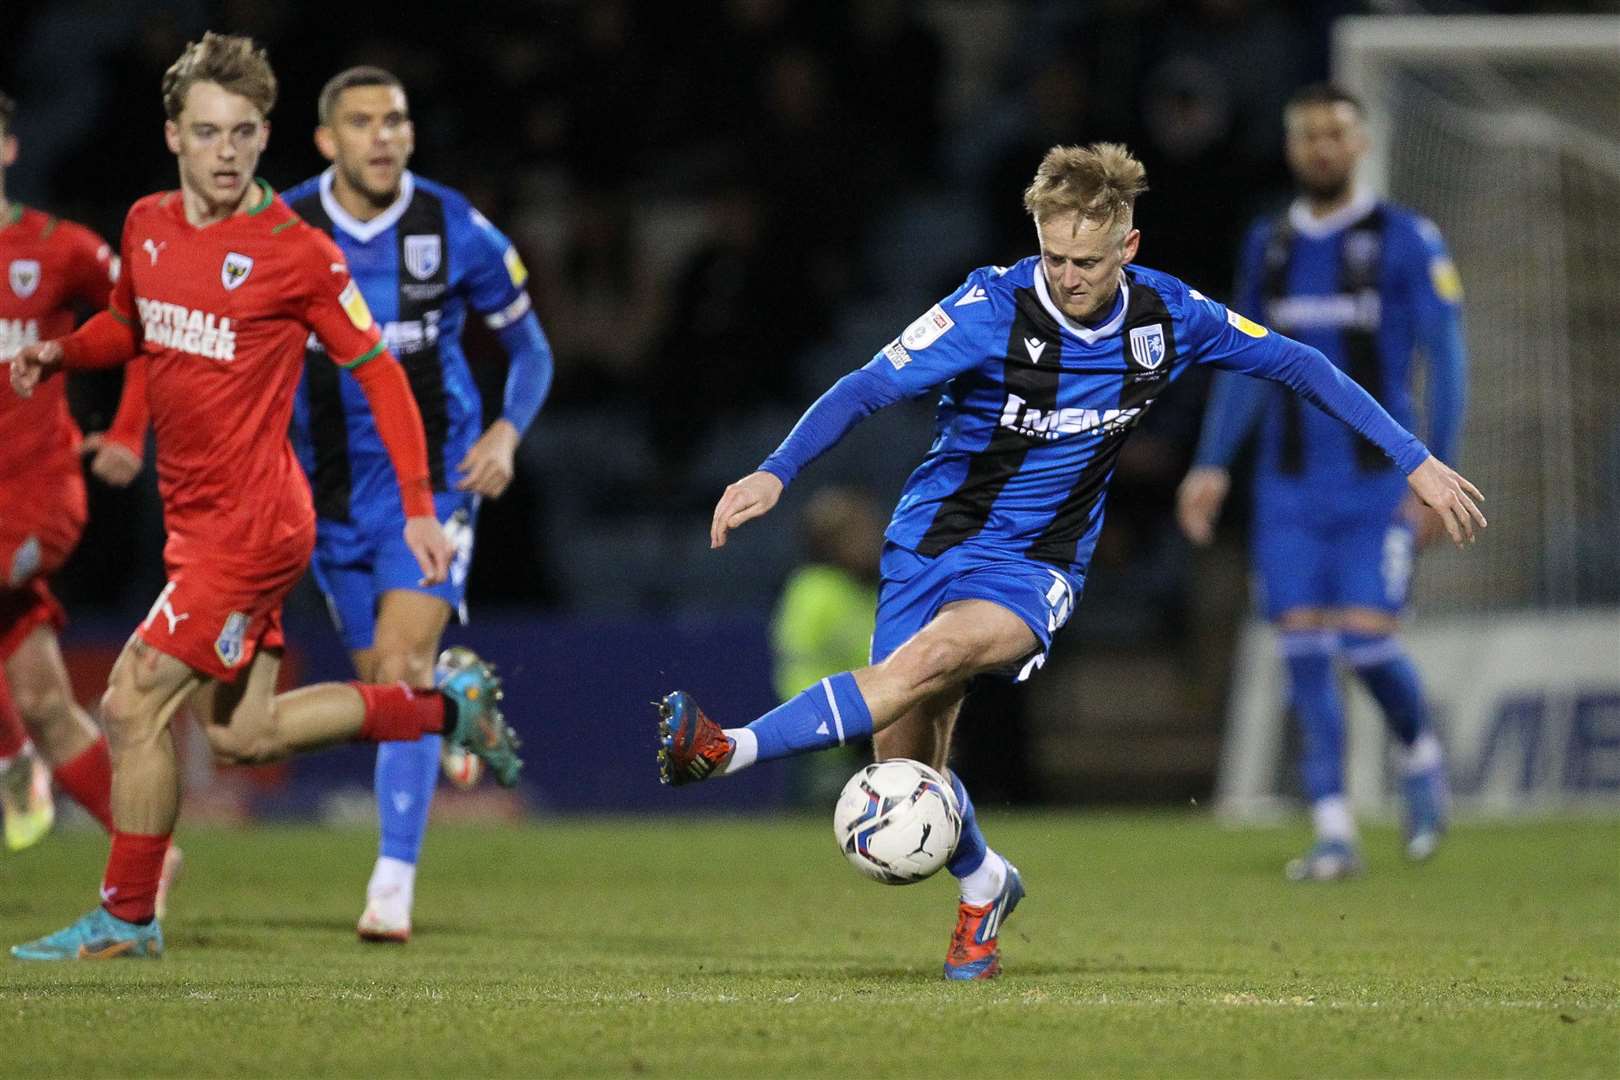 Ben Reeves has given the Gills extra options in attack Picture: KPI